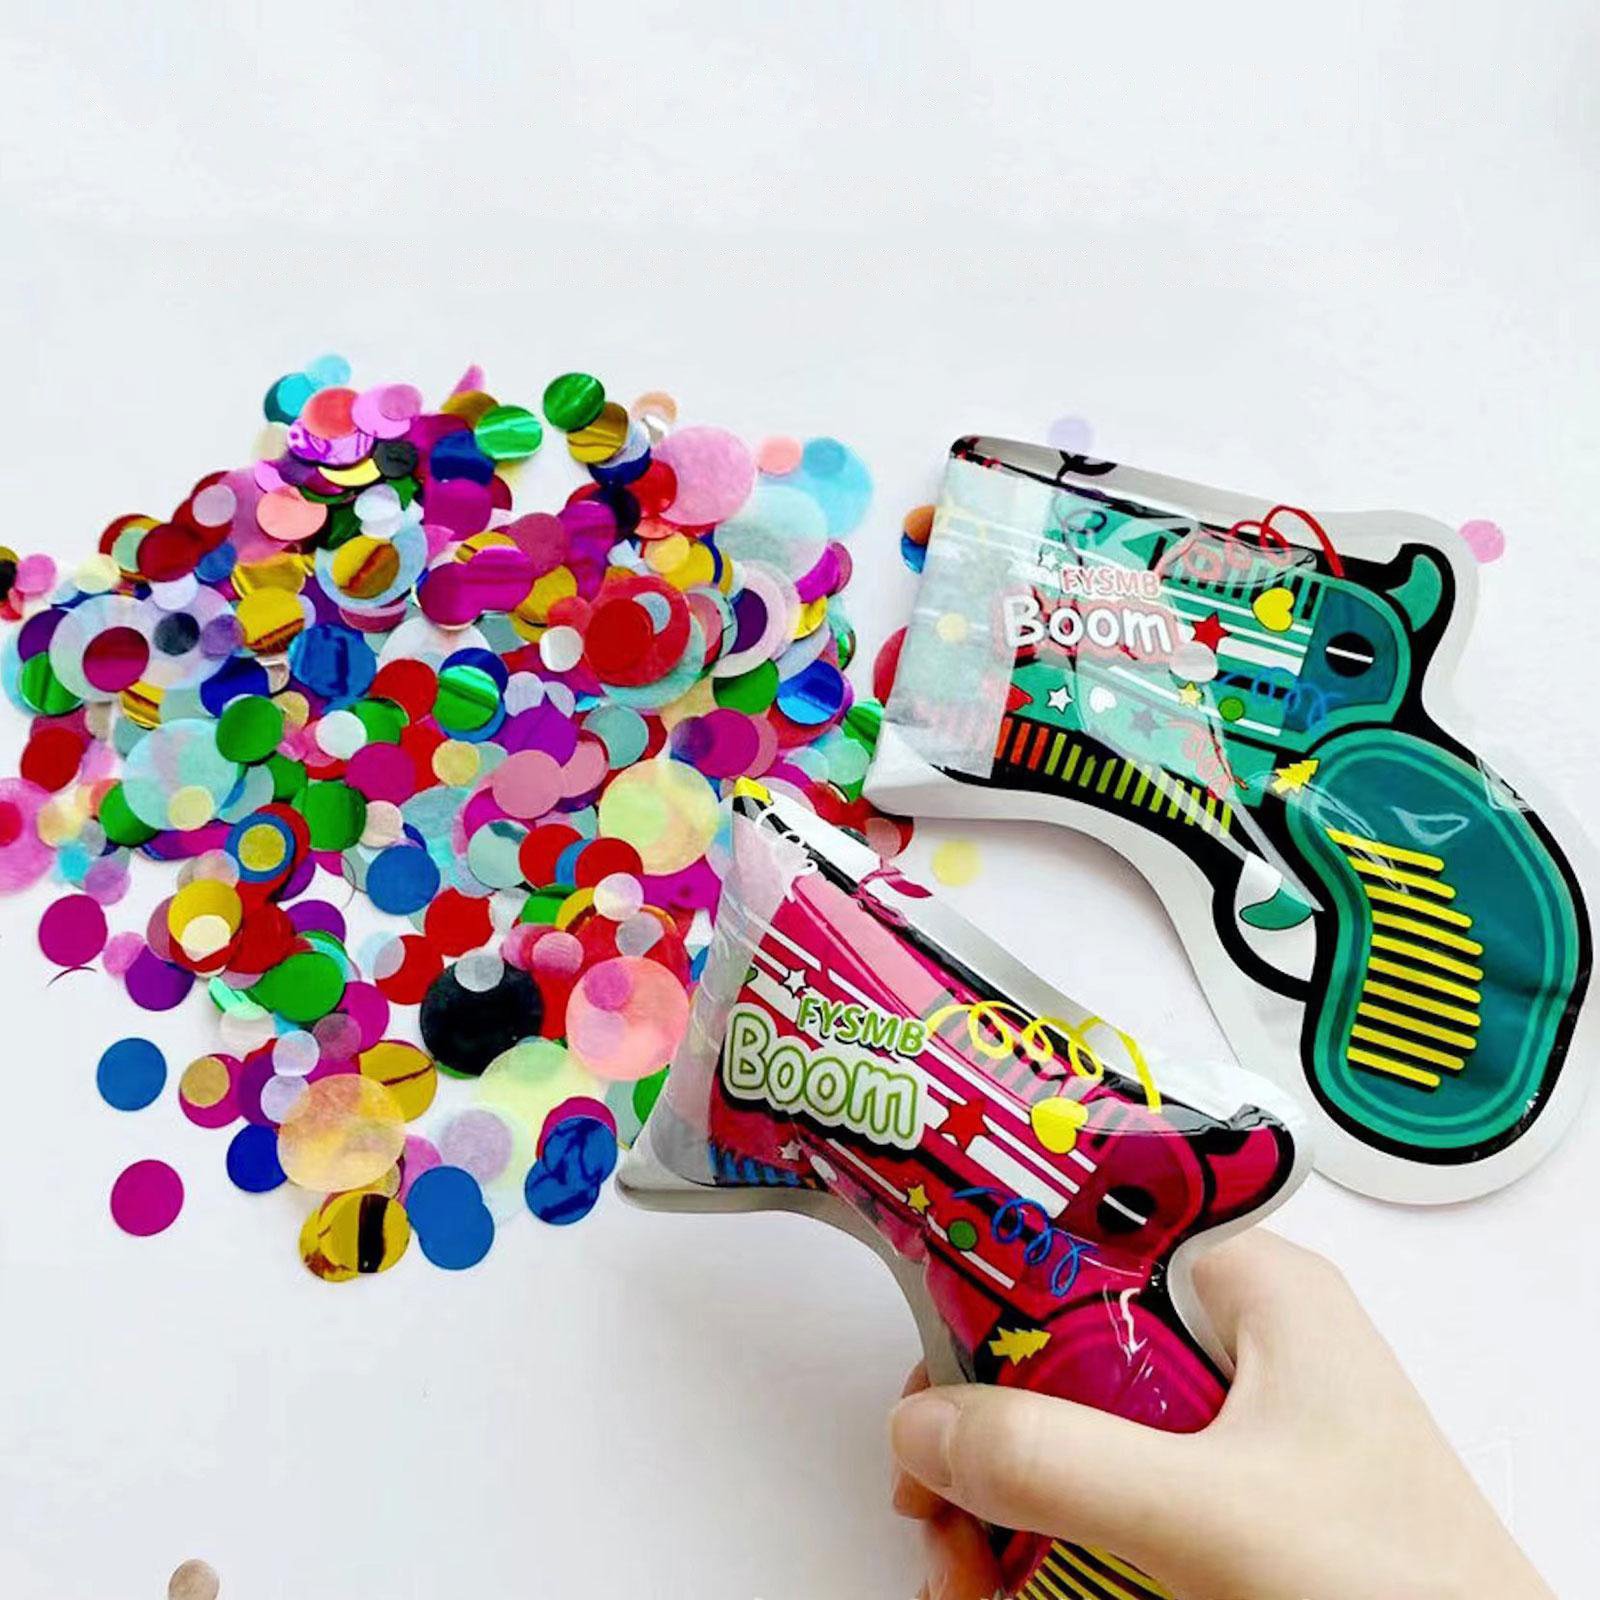 Confetti Cannon🎉Self-inflating toys - inflatable fireworks gun🎉 - 🔥Average 0.49$ each🔥